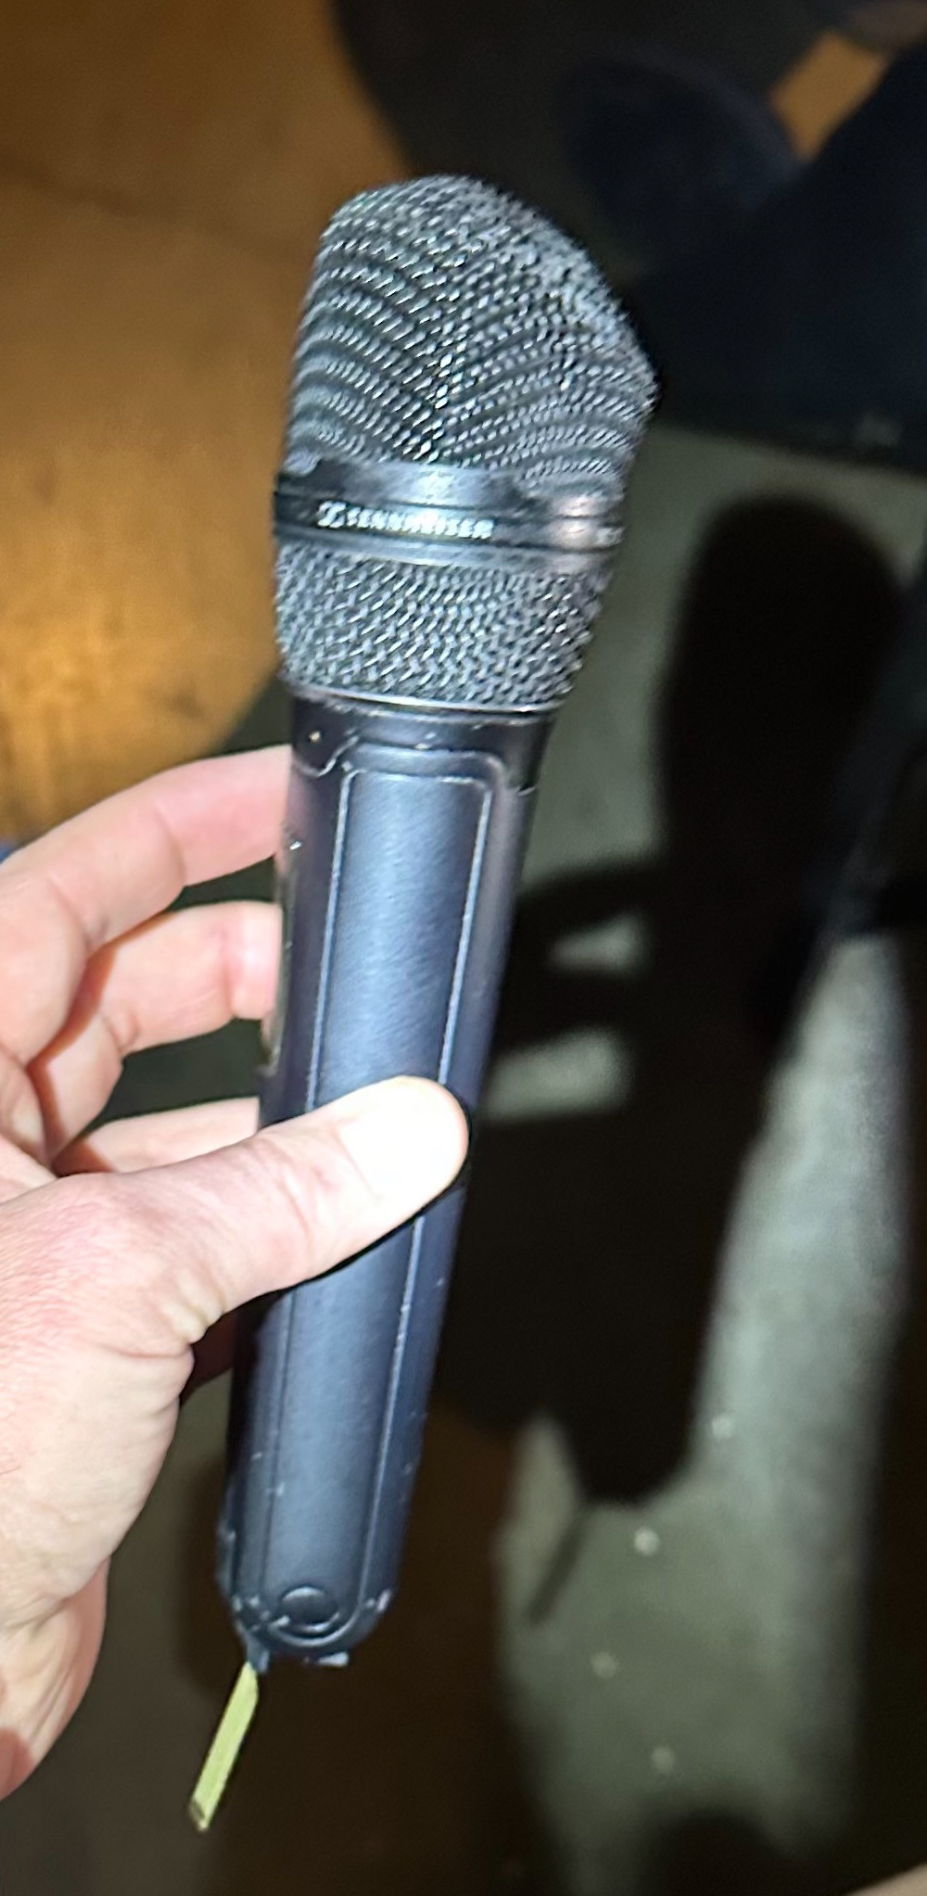 Highly energetic stage shows can take their toll on a microphone. Spare devices remain a must